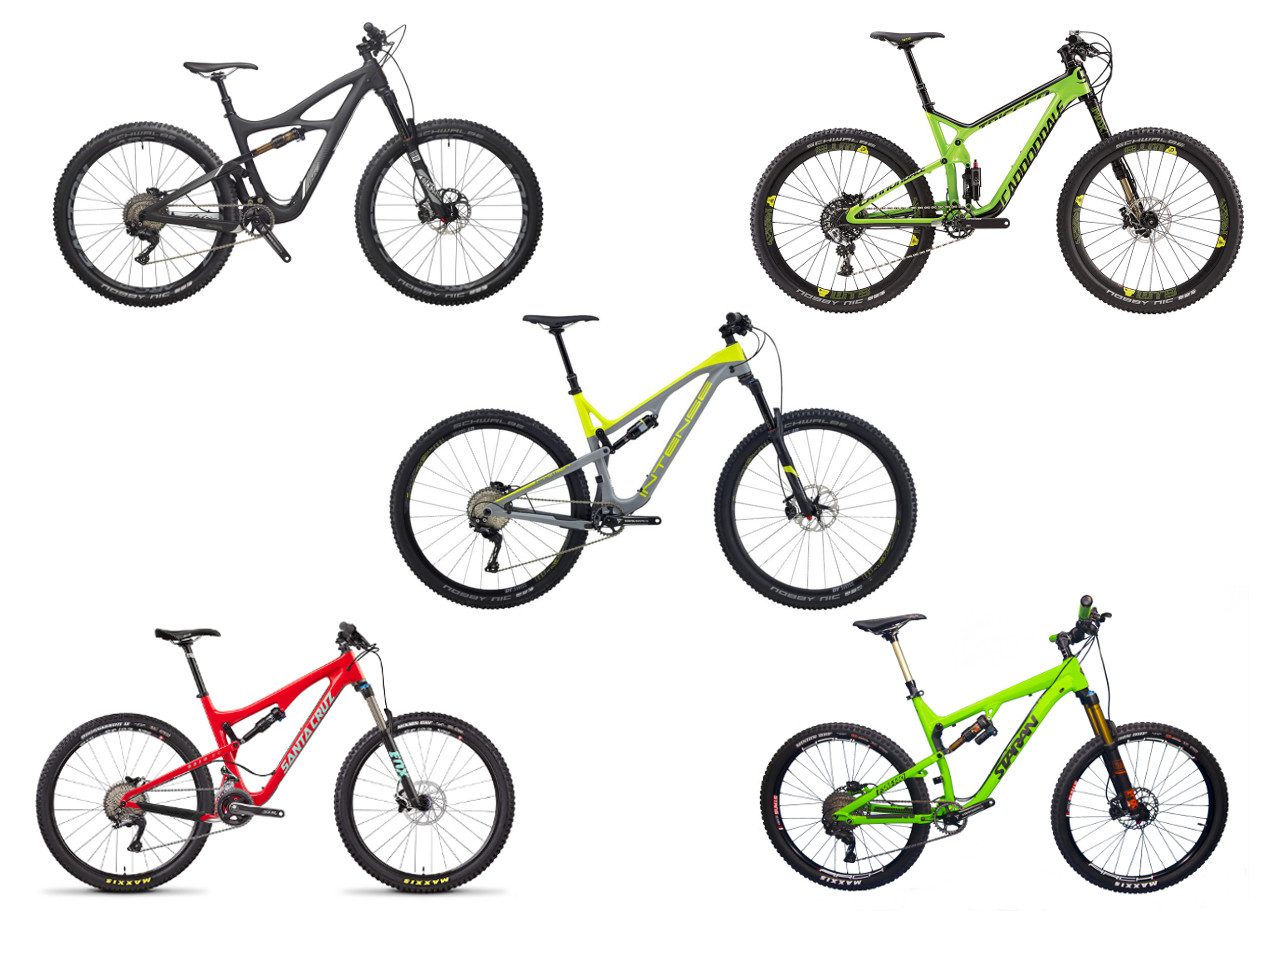 Hardtail MTB Buyer's Guide